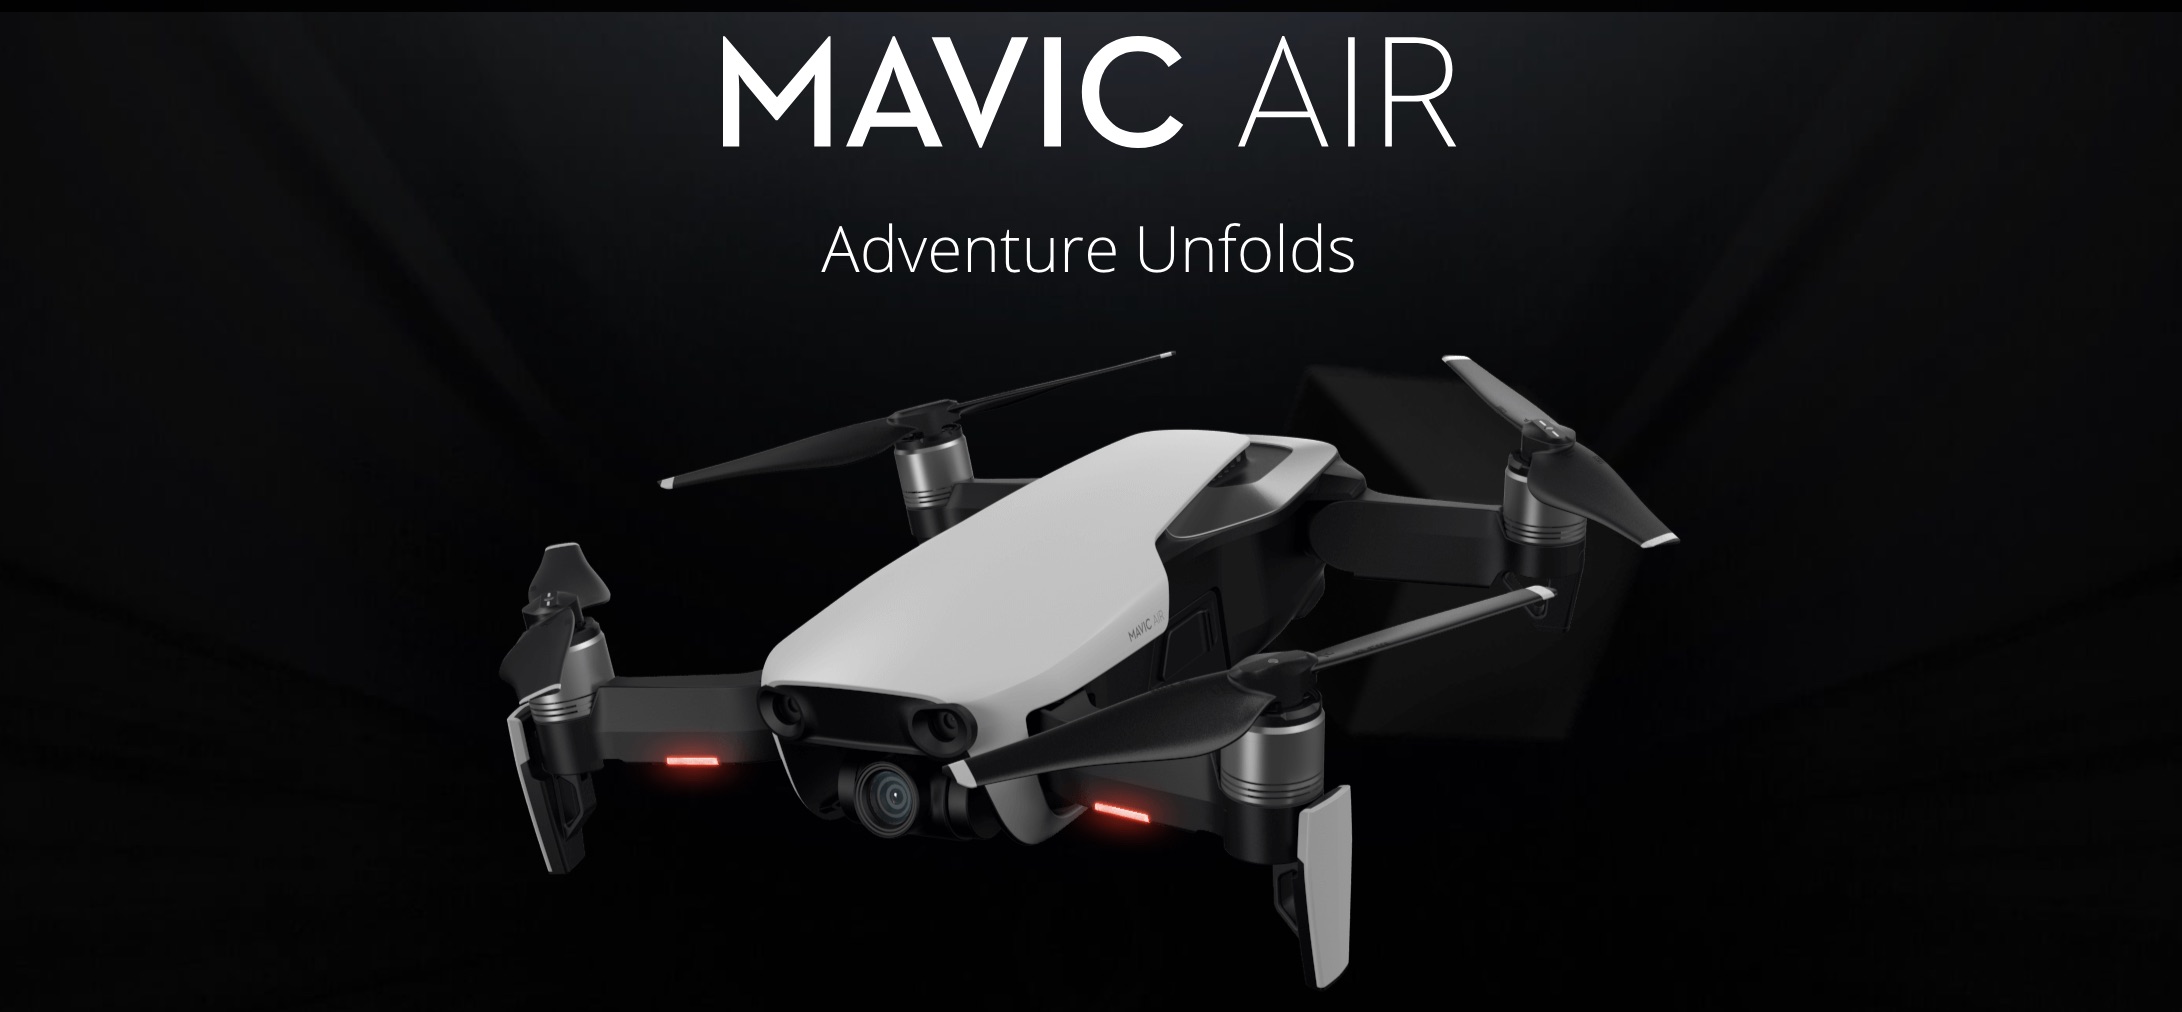 How to buy the DJI Mavic Air for its 